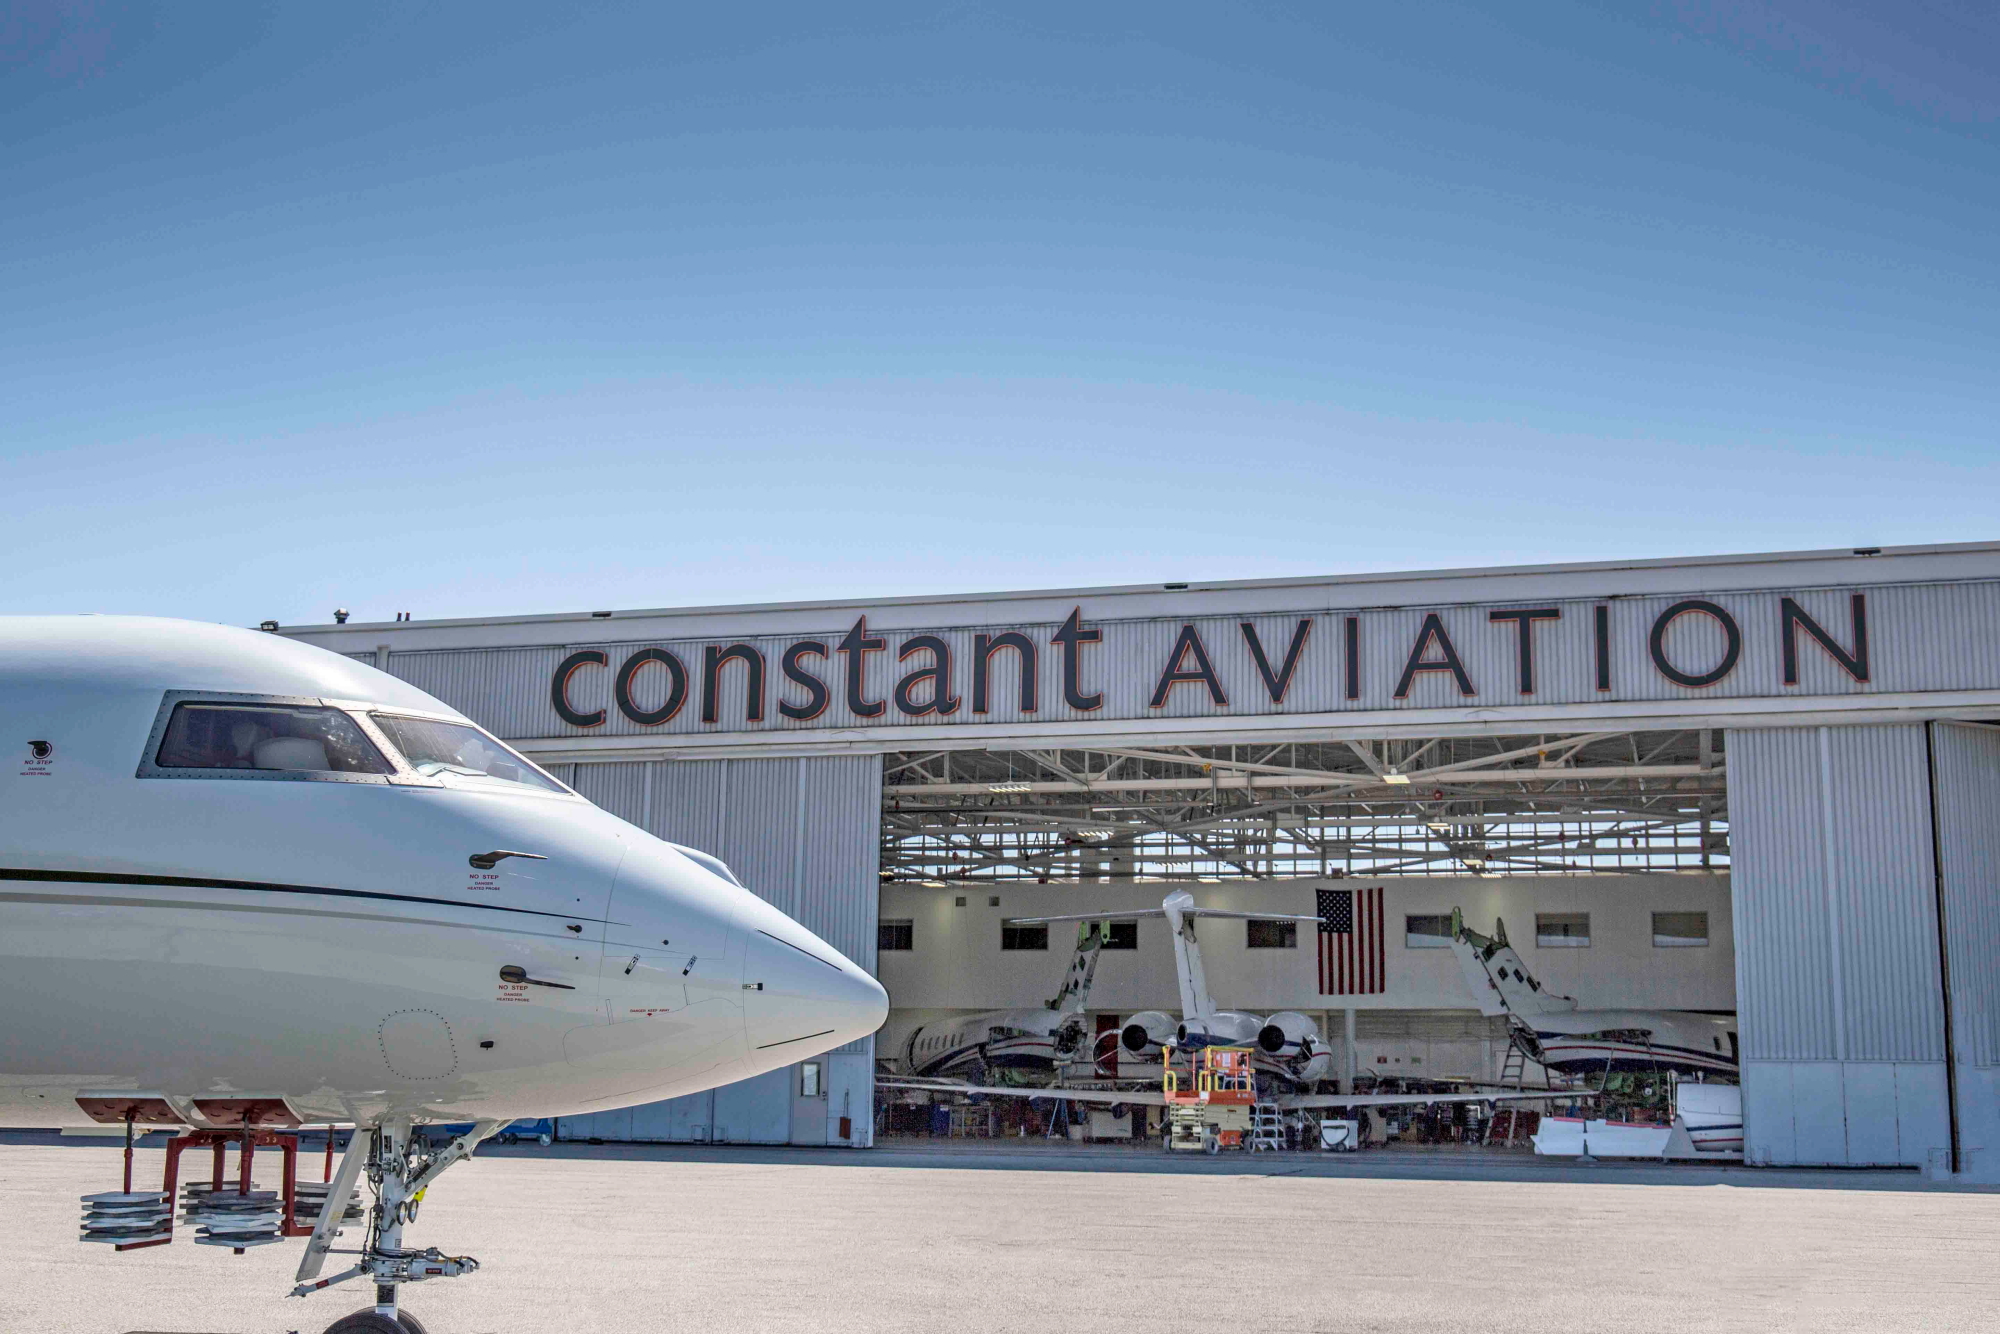 With maintenance facilities and AOG services spanning the country, Constant Aviation has experience and expertise on a variety of business aircraft types including Bombardier’s Global Express and Learjet, Gulfstream GIV/GIVSP, G350/G450, G5/G550, Embraer’s Legacy and Phenom family, Beechjet, Nextant and Dassault Falcon 50/900/2000 models. Click to enlarge.